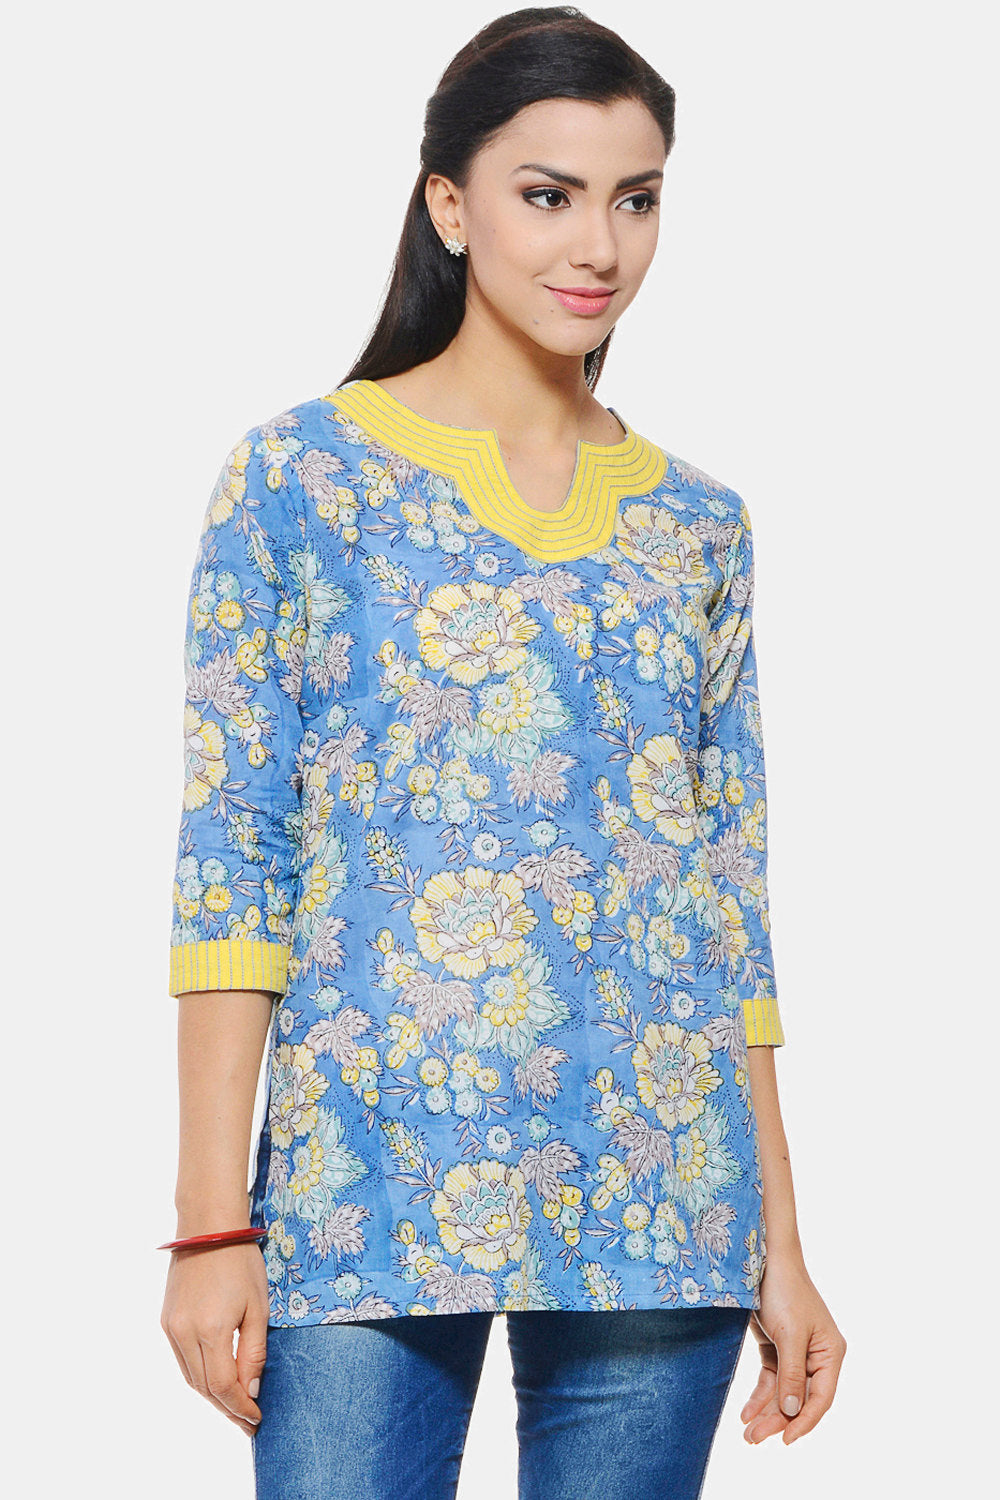 Hand Block Printed Indian Kurti in blue floral design with Embroidery on neck and sleeves